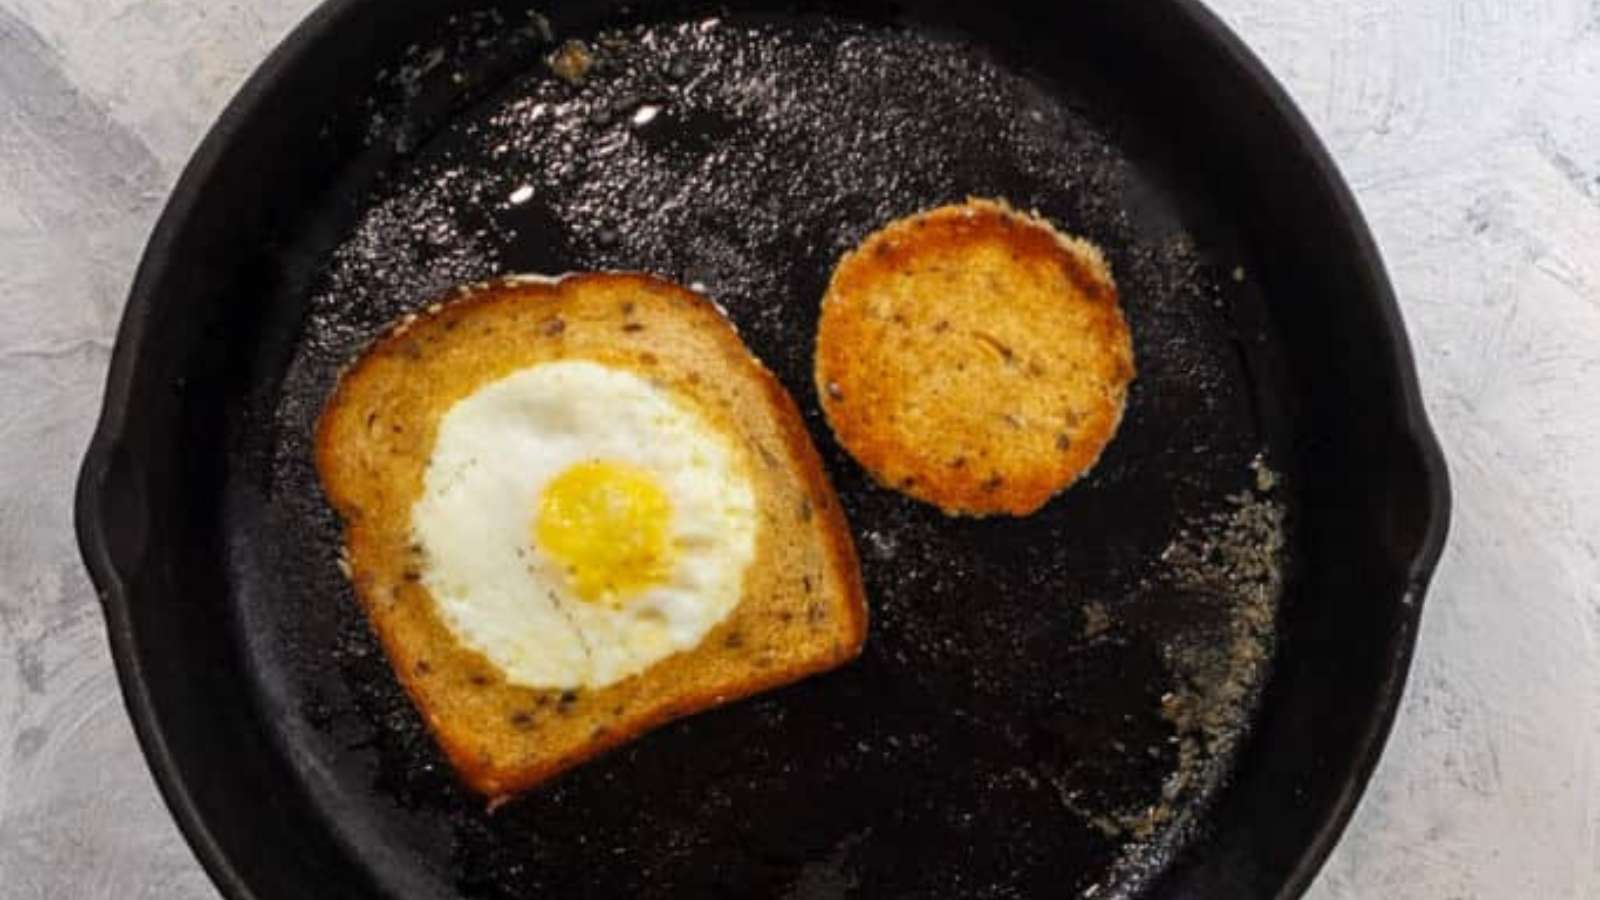 A fried egg on toast in a skillet.